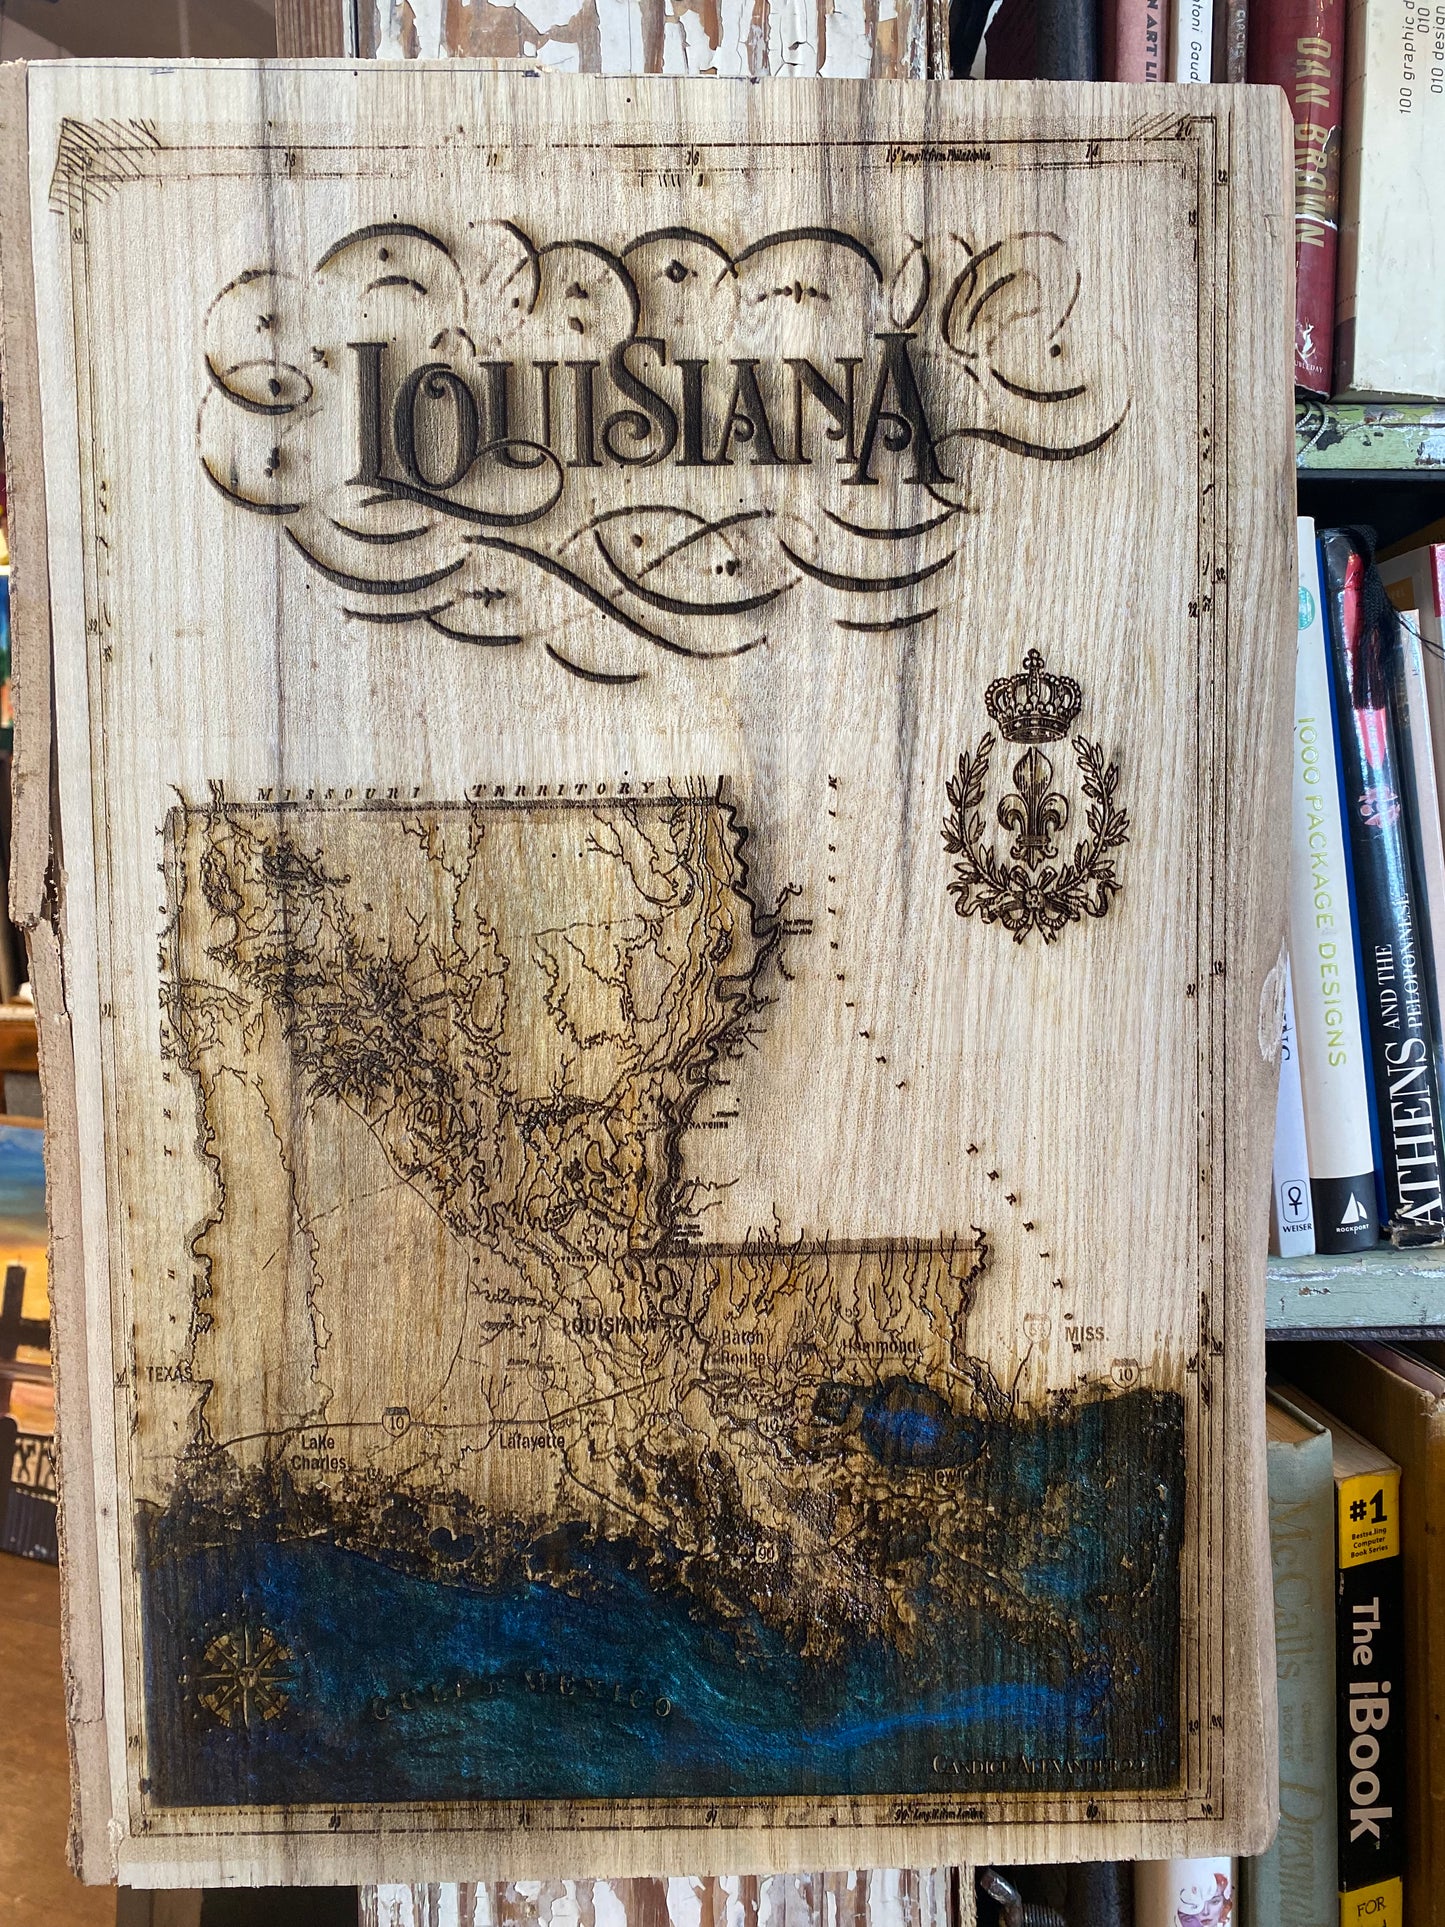 Old Louisiana Map Wood Engraving "One of a Kind"